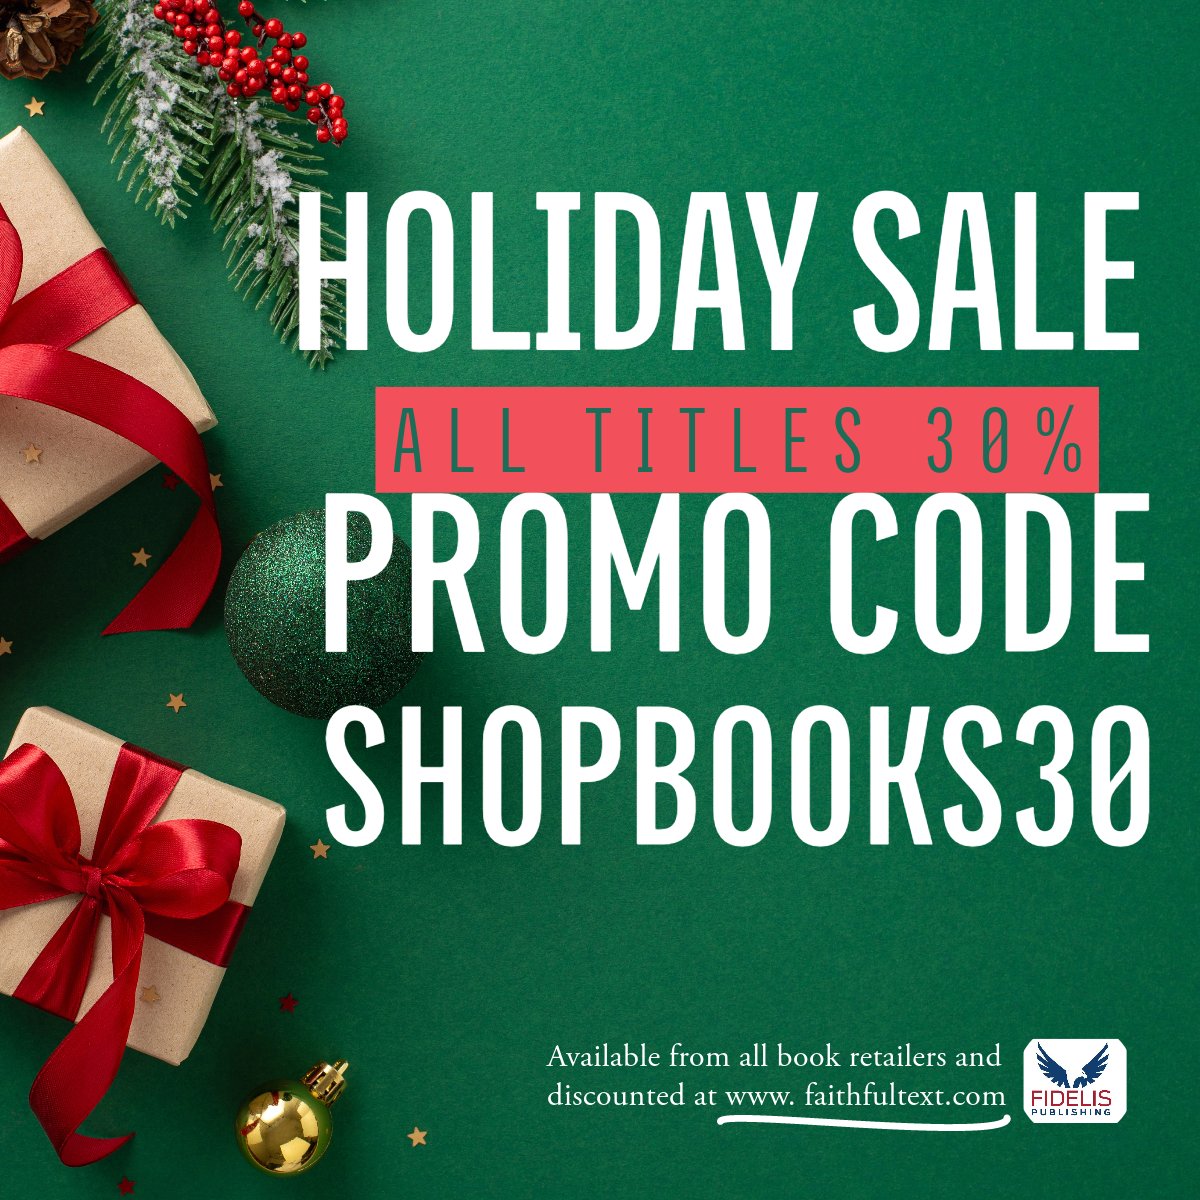 Use promo code SHOPBOOKS30 at faithfultext.com and enjoy 30% off all titles sitewide! Offer good until December 22! #Christmas2023